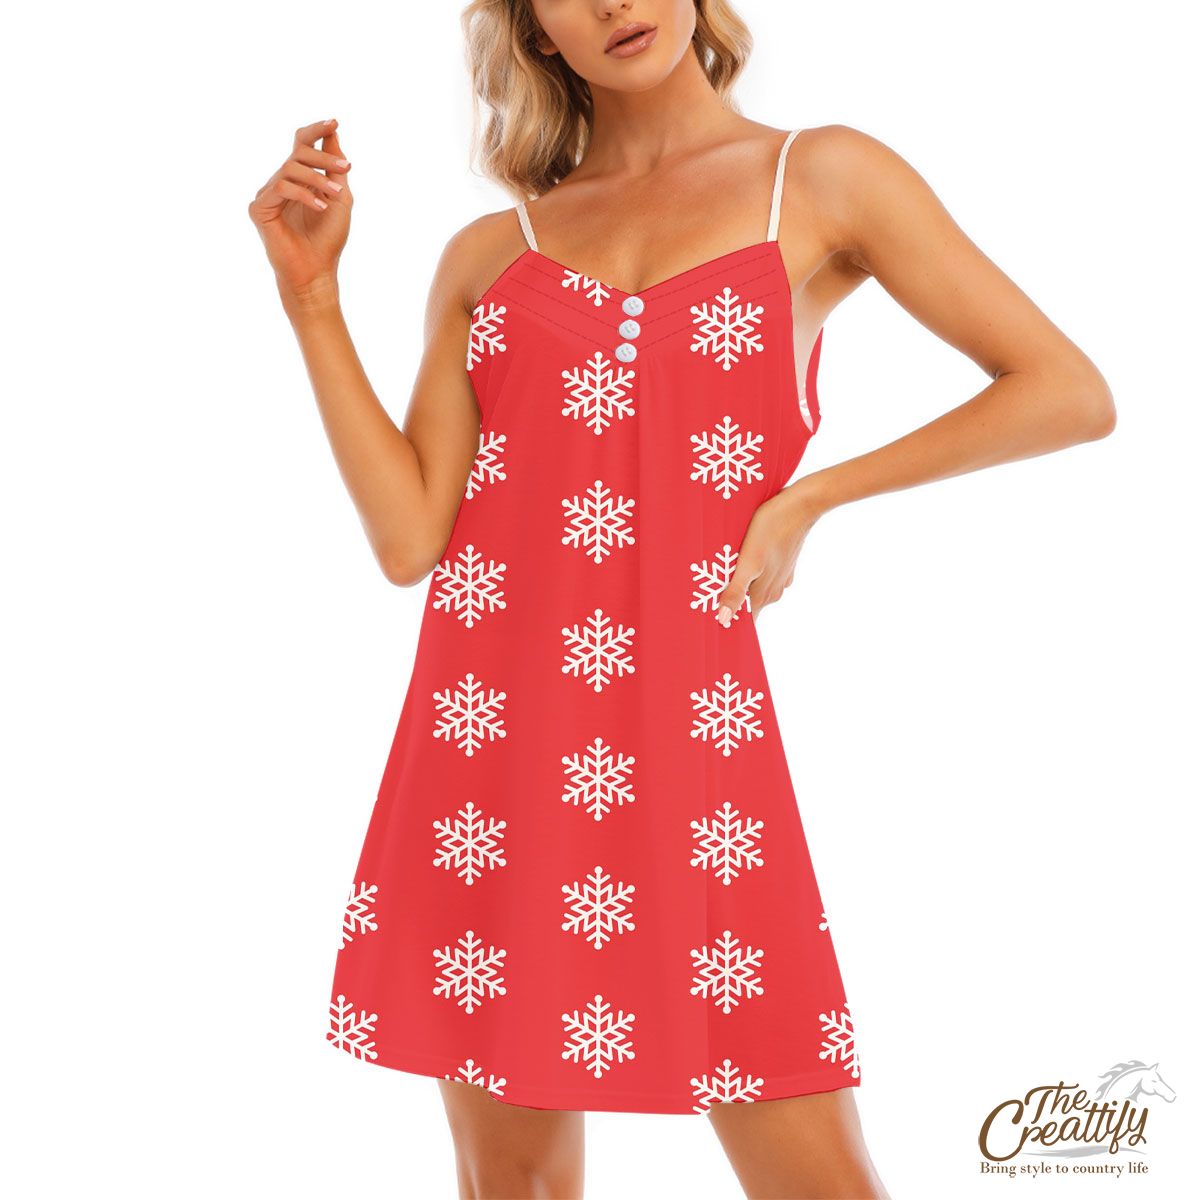 Snowflake Pattern, Christmas Snowflakes, Christmas Present Ideas With Red V-Neck Sleeveless Cami Dress